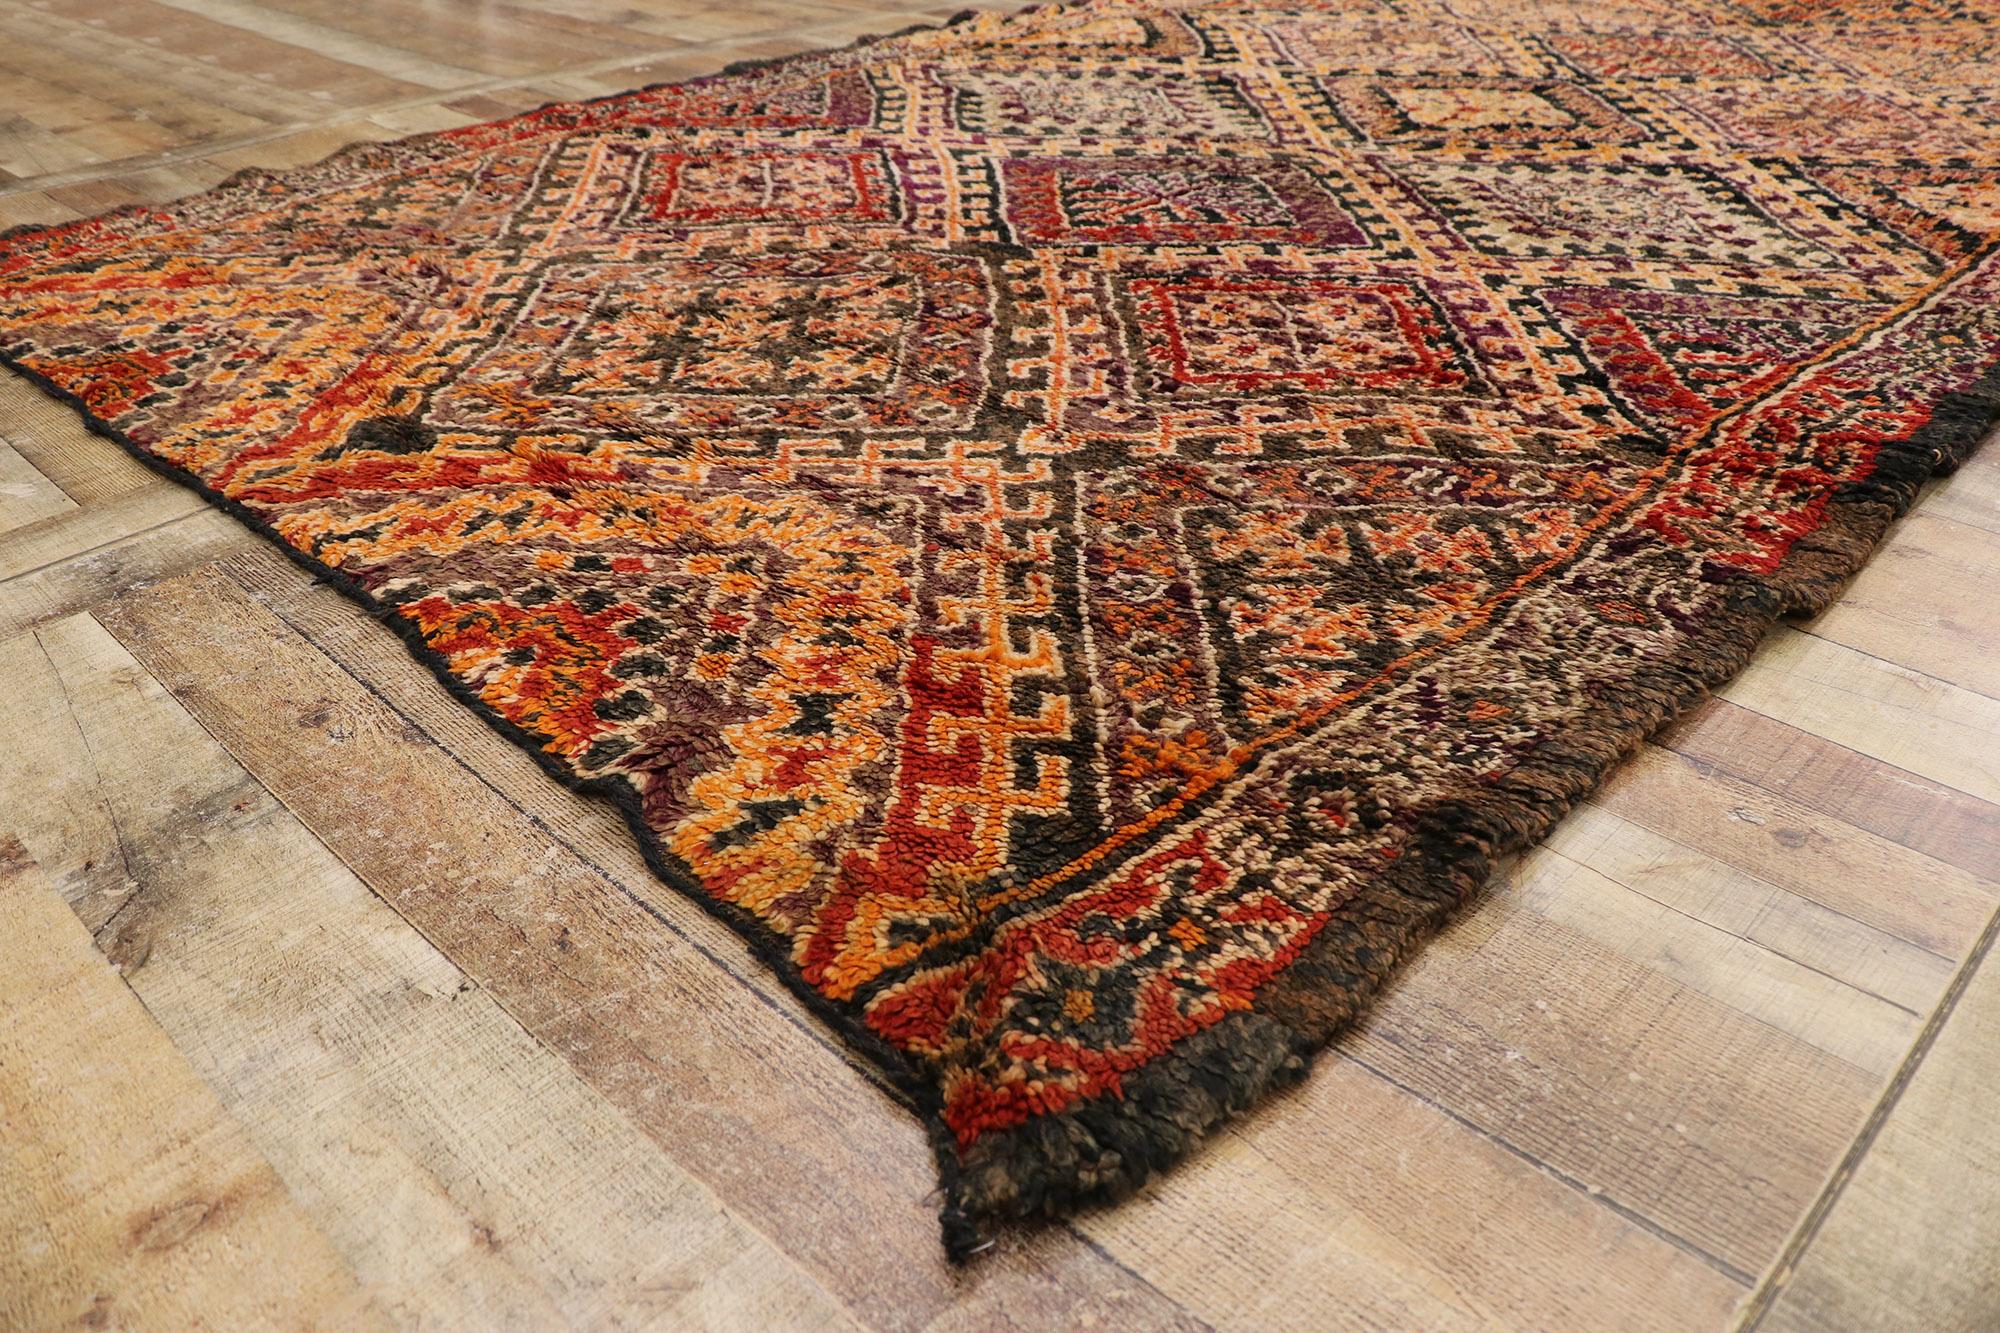 20th Century Vintage Berber Beni M'Guild Moroccan Rug with Mid-Century Modern Style For Sale